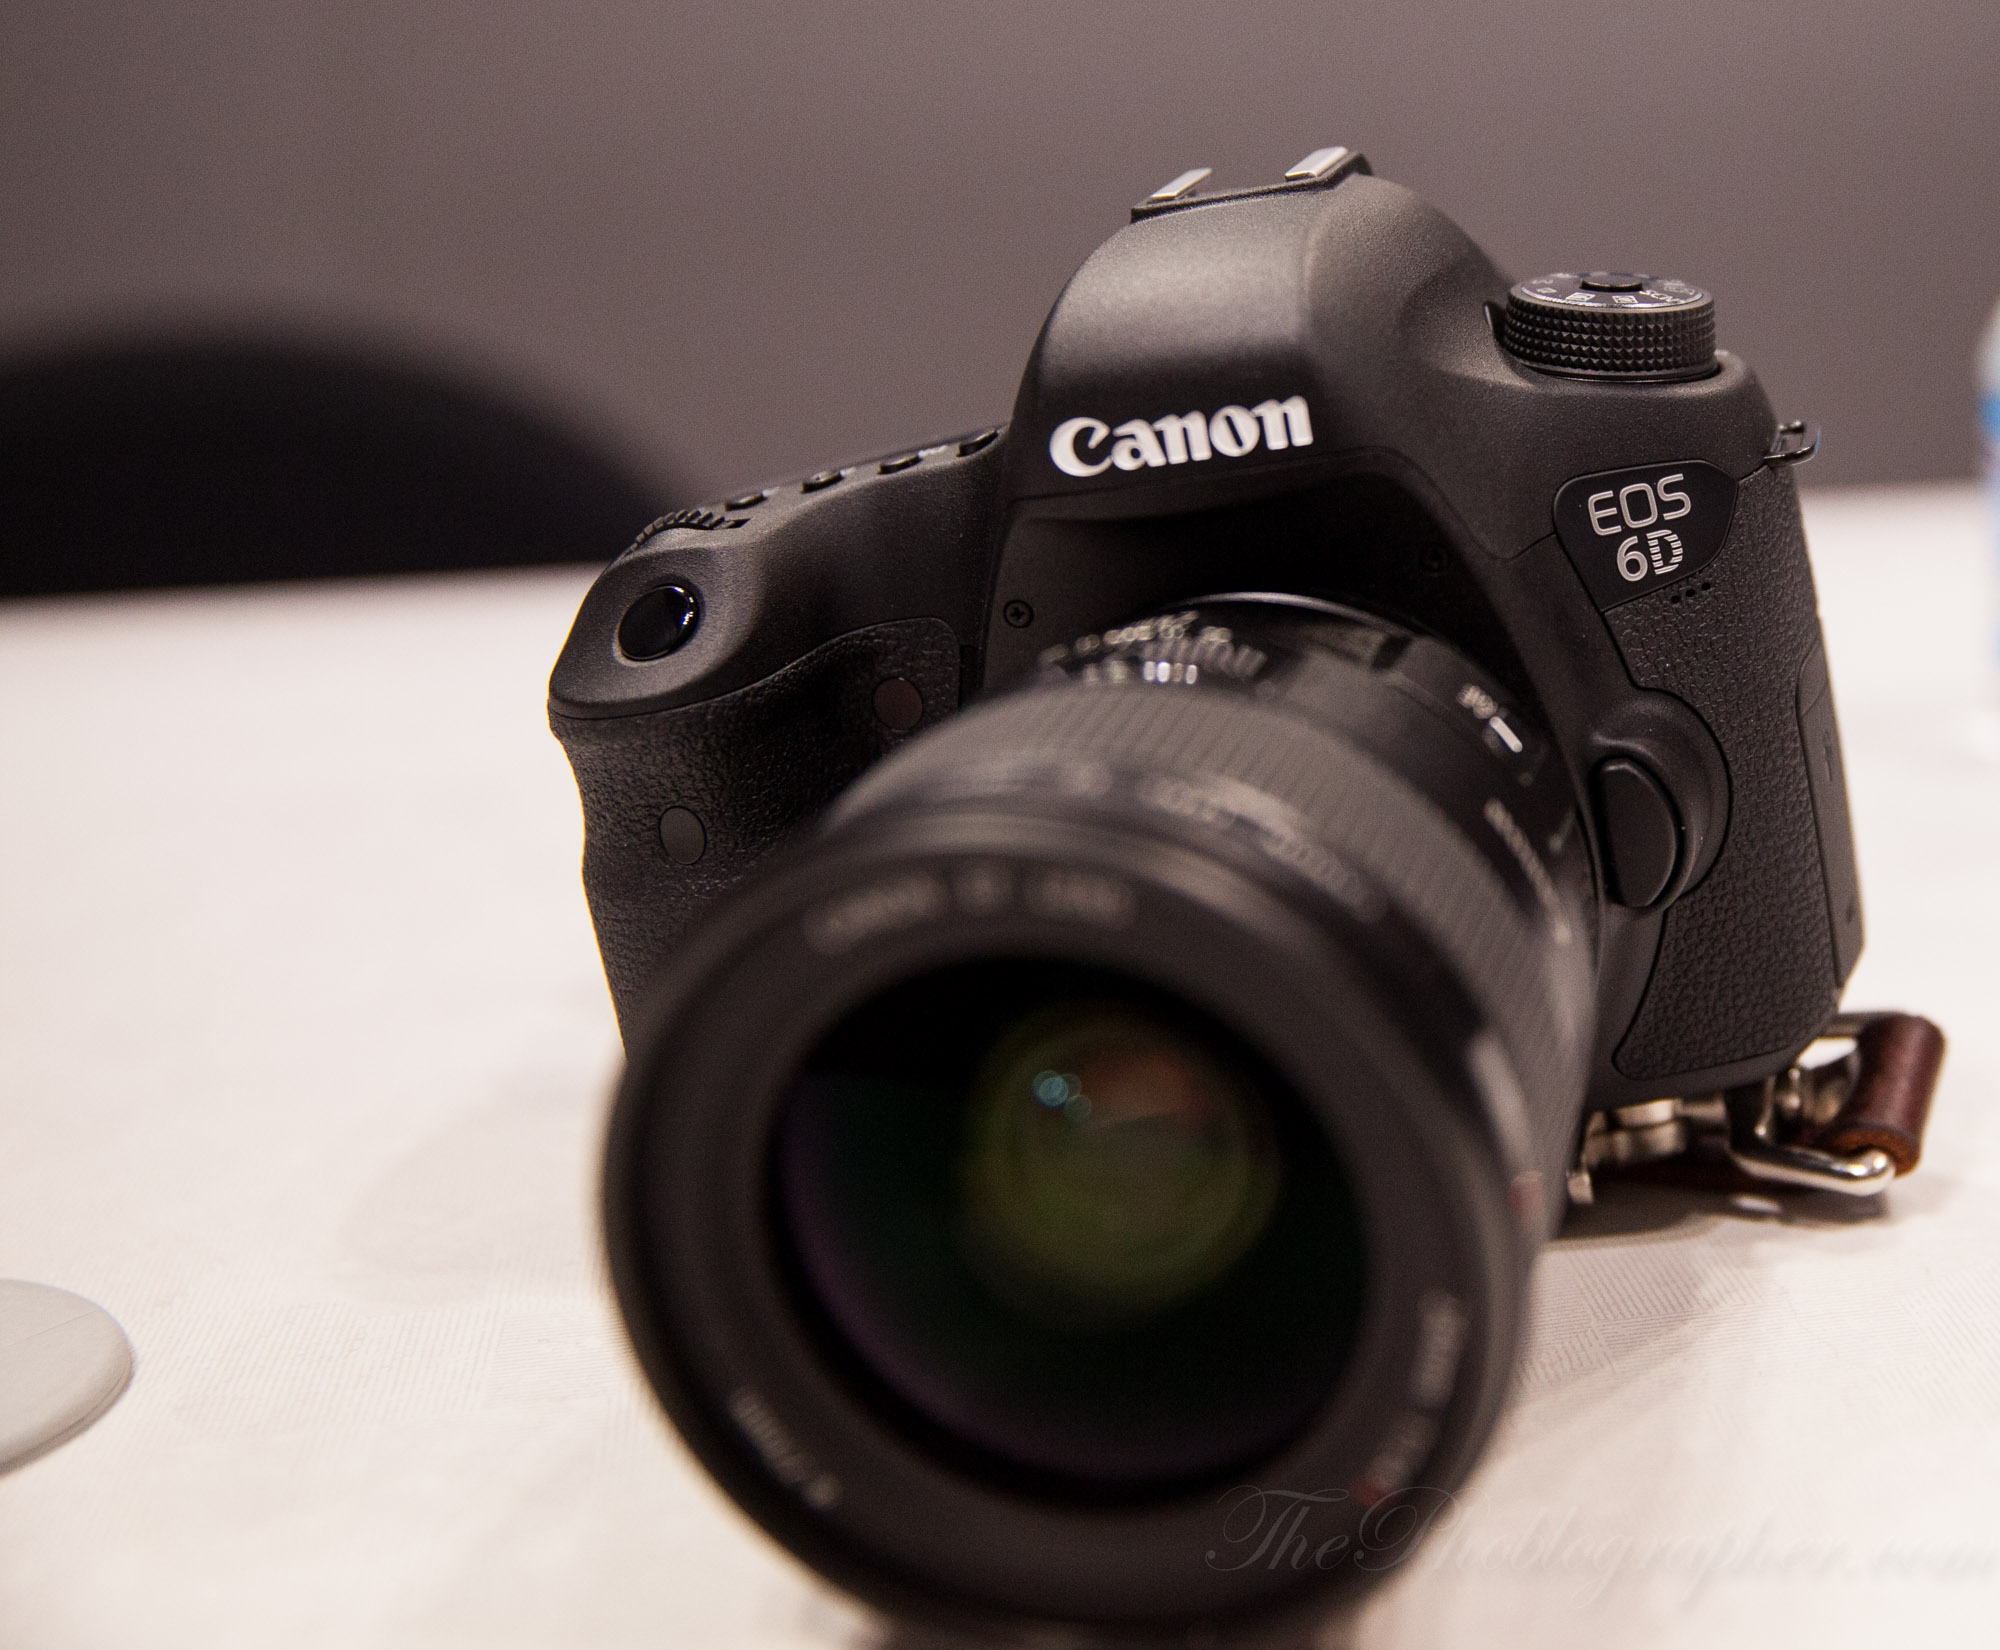 Chris-Gampat-The-Phoblographer-Canon-6D-Hands-on-review-first-impressions-product-images-6-of-6ISO-1600.jpg